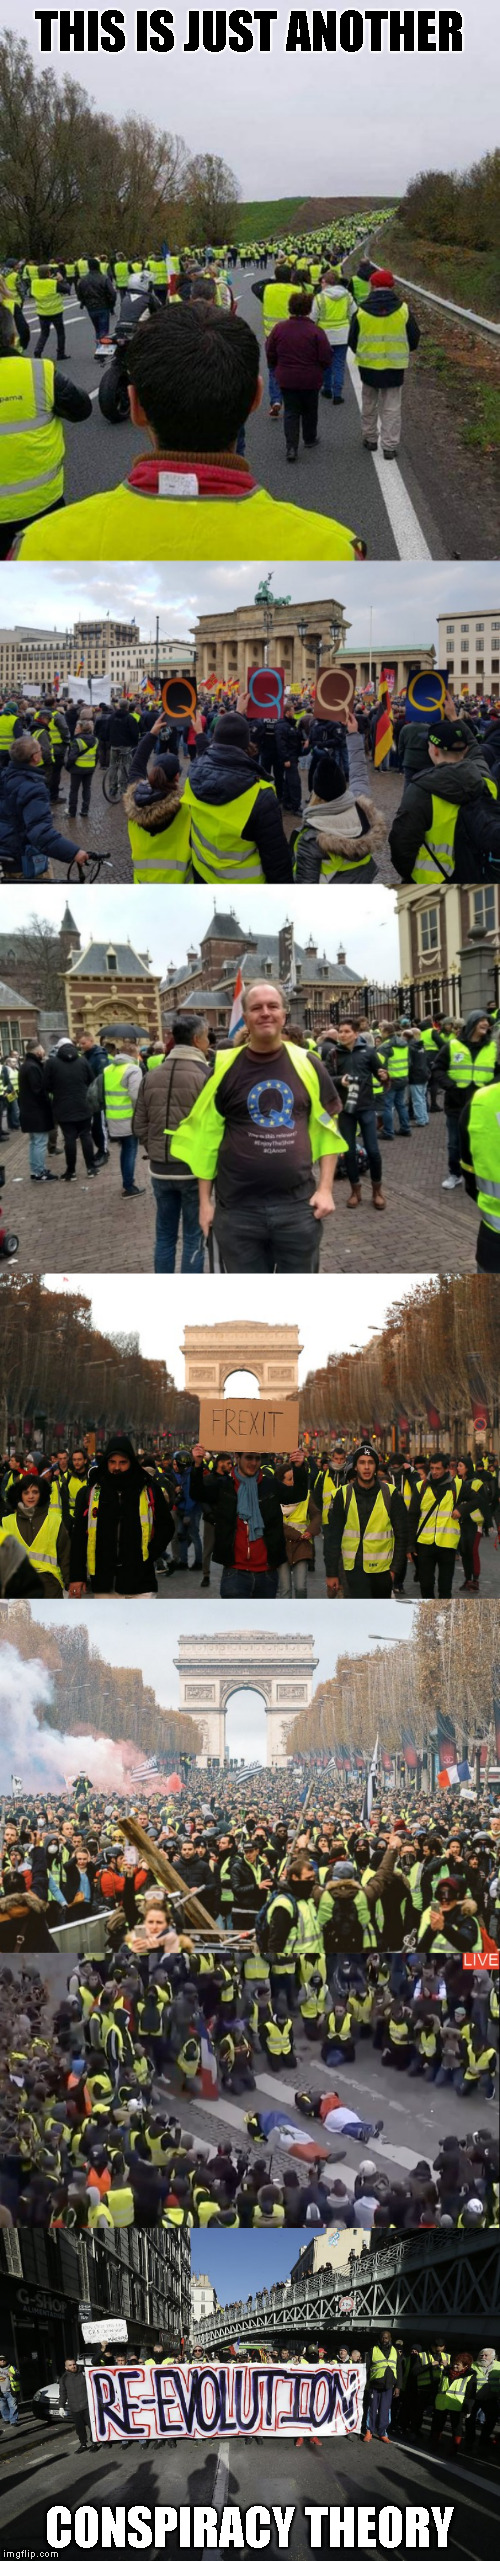 still asleep or denial much | THIS IS JUST ANOTHER; CONSPIRACY THEORY | image tagged in memes,yellow vests,revolution,nwo,globalism,the great awakening | made w/ Imgflip meme maker